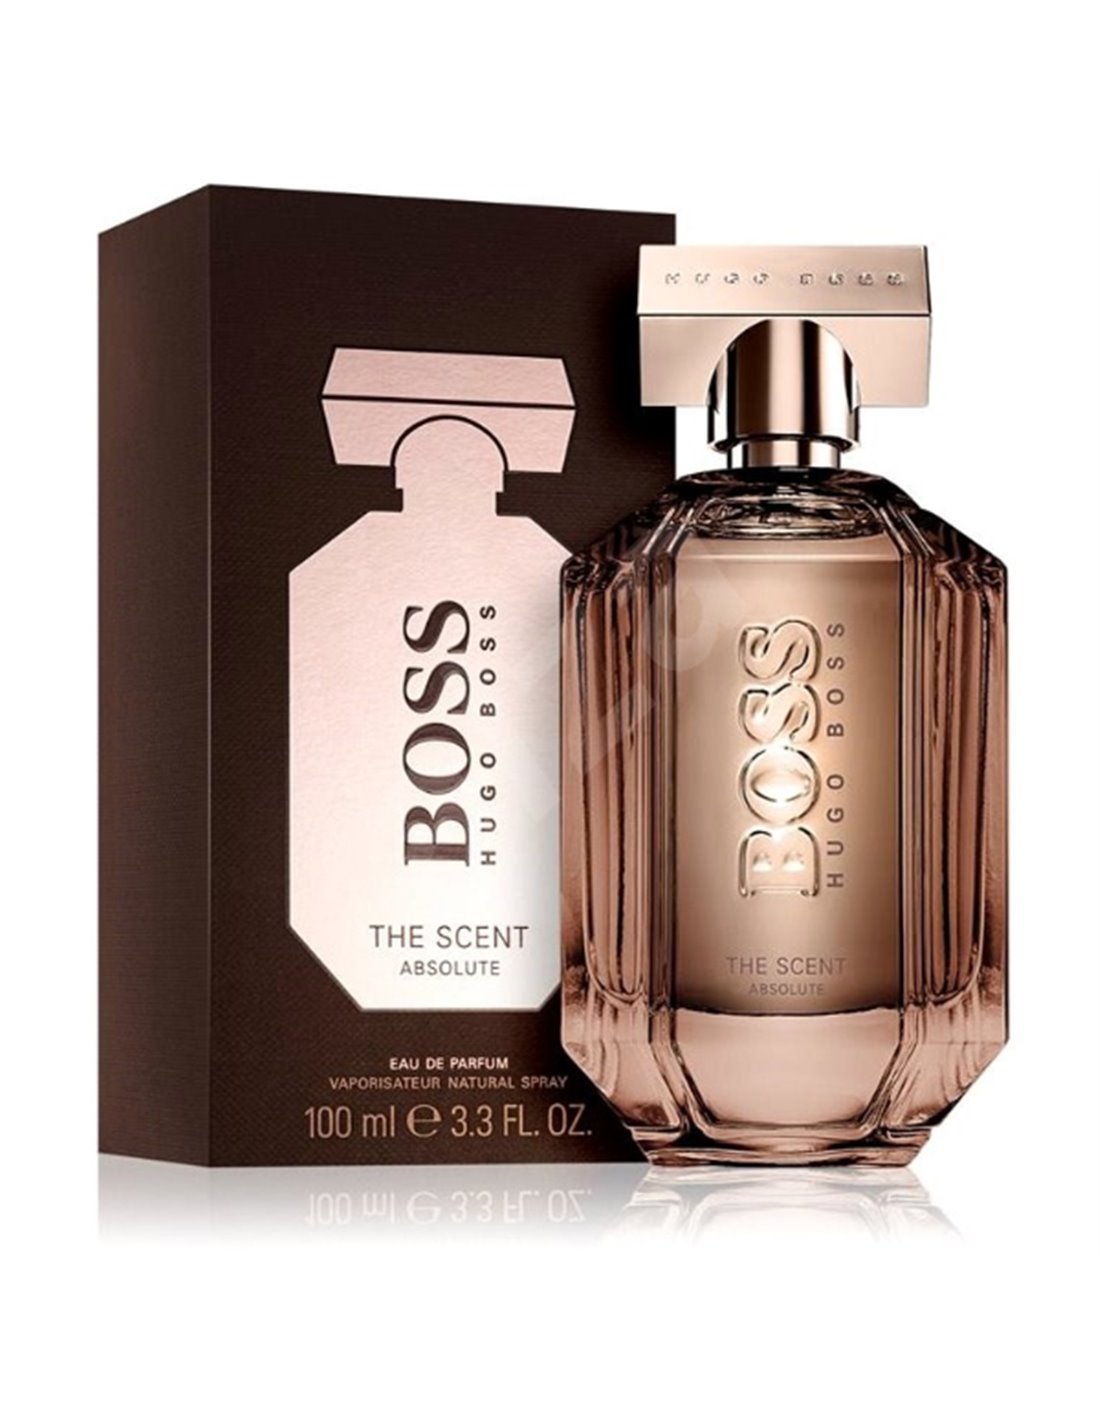 The scent absolute. Hugo Boss the Scent absolute 100ml. Hugo Boss the Scent le Parfum. Hugo Boss the Scent le Parfum 100 ml. Hugo Boss the Scent for her 100 ml.